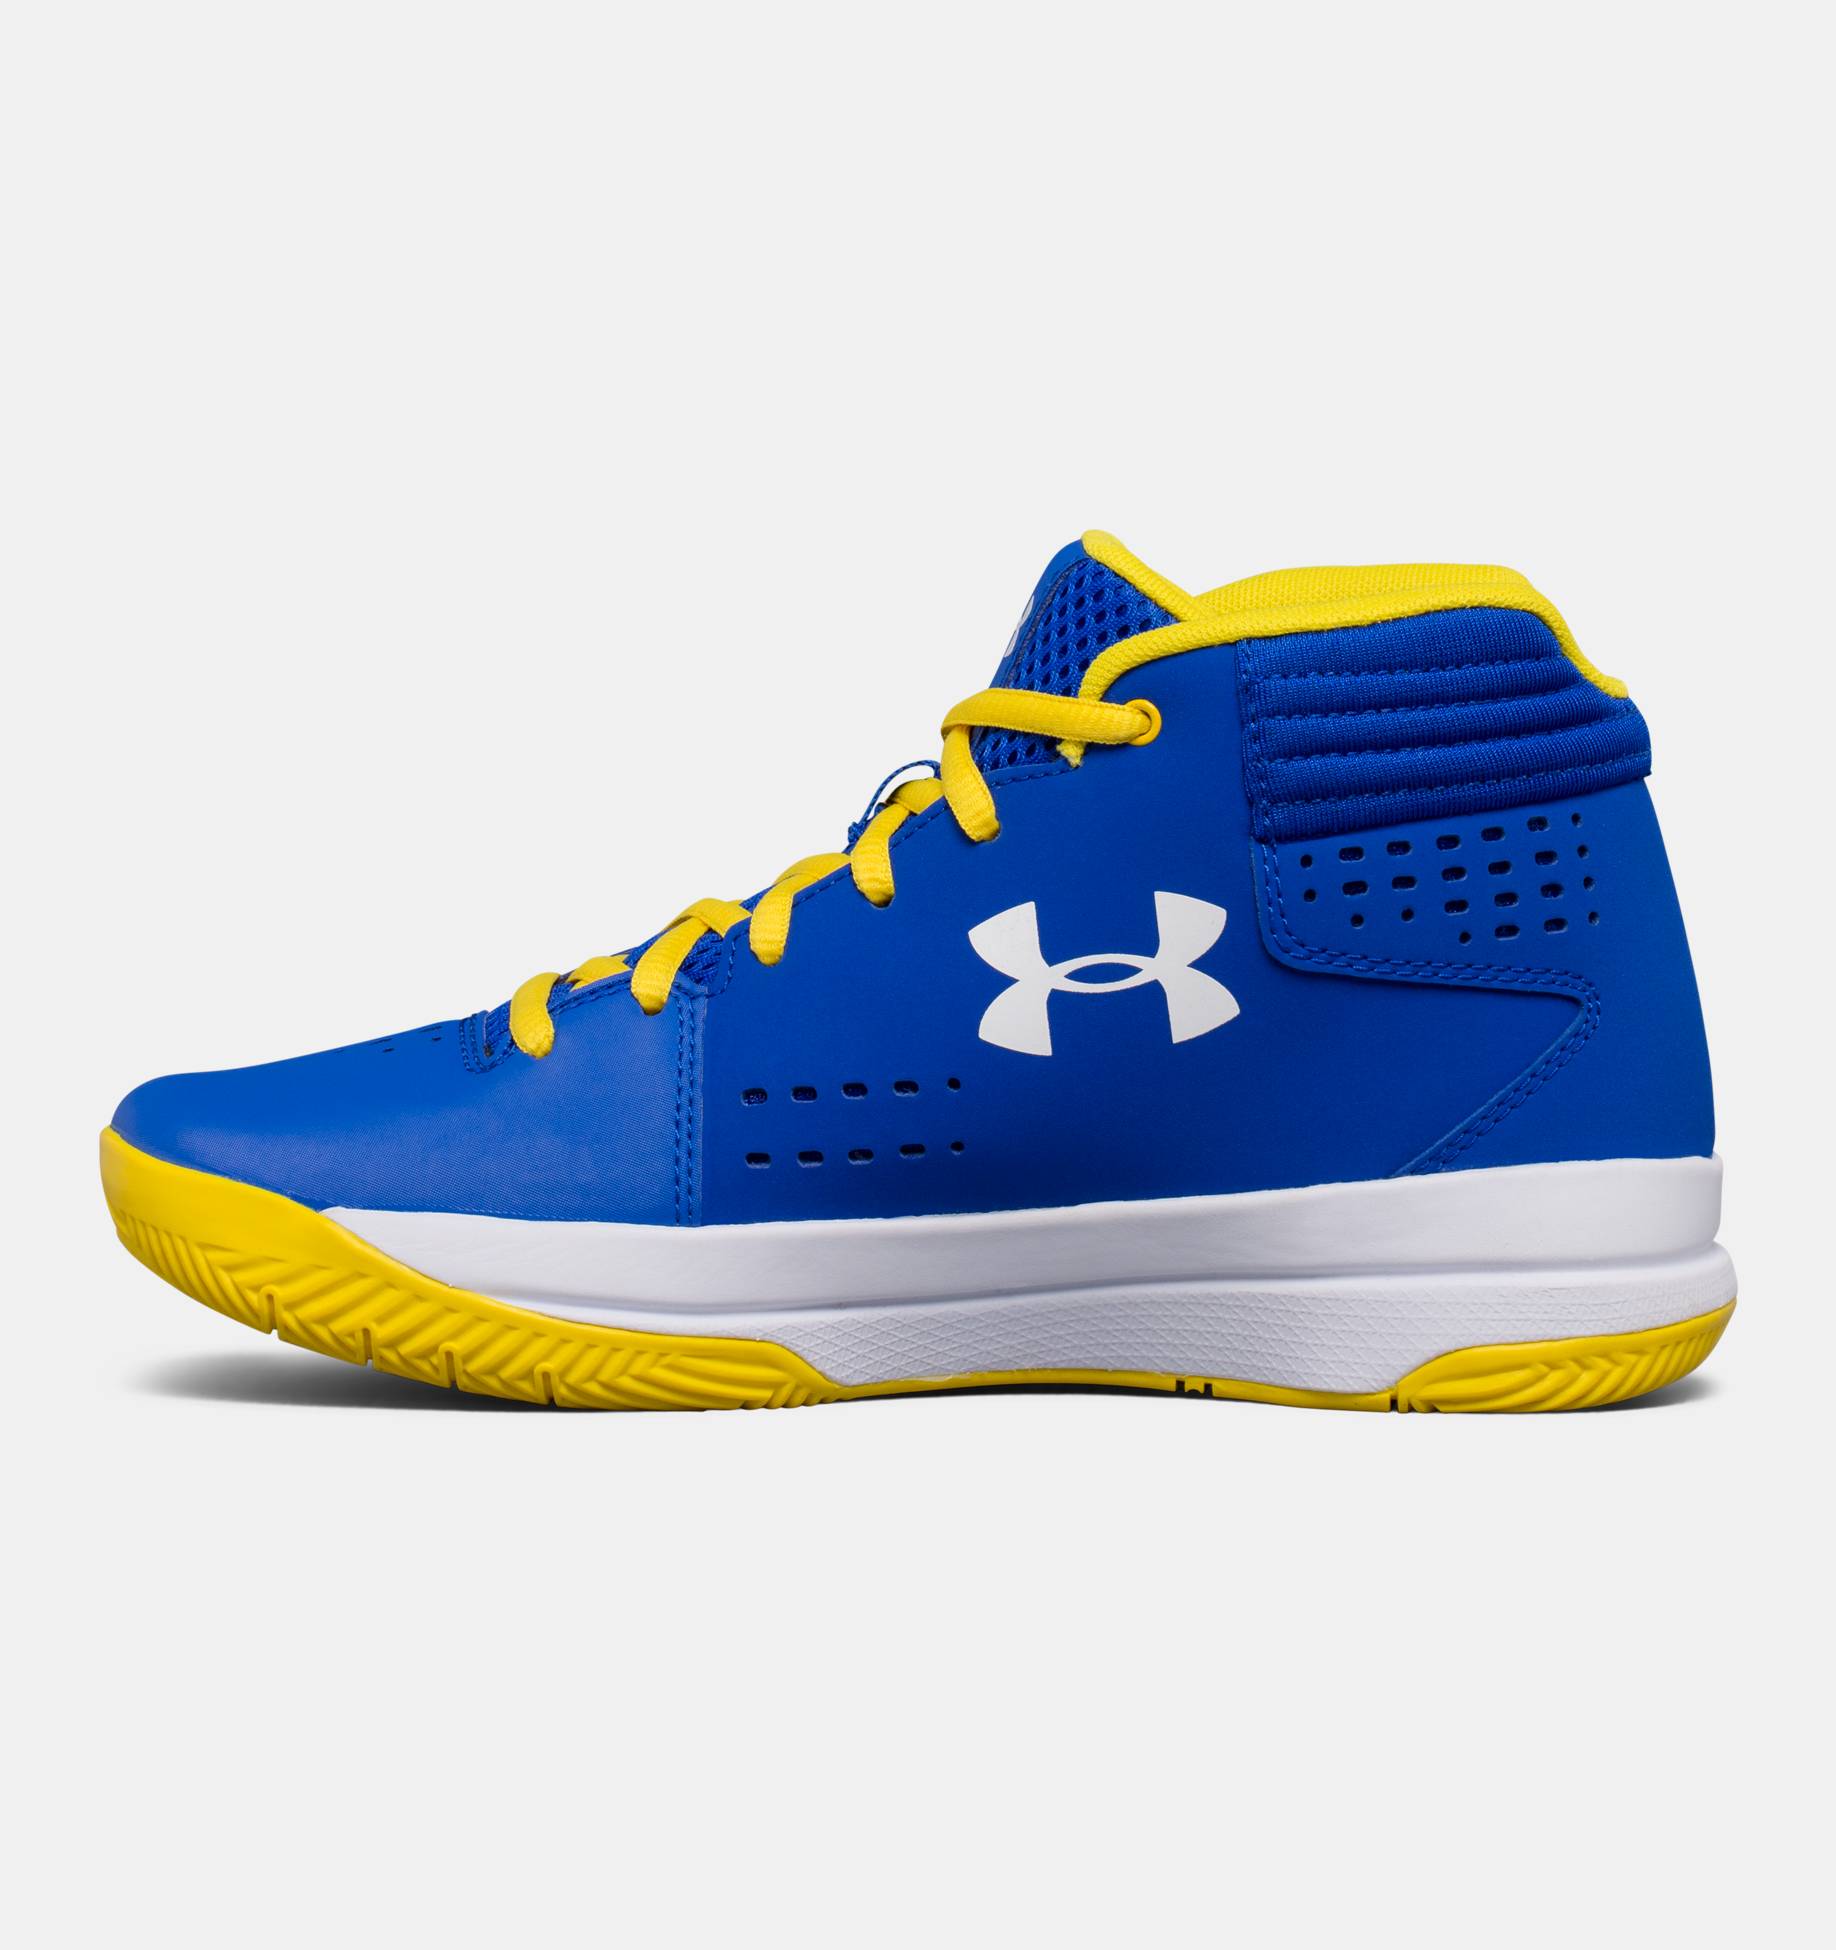 Basketball Shoes -  under armour Grade School Jet Shoes 6009